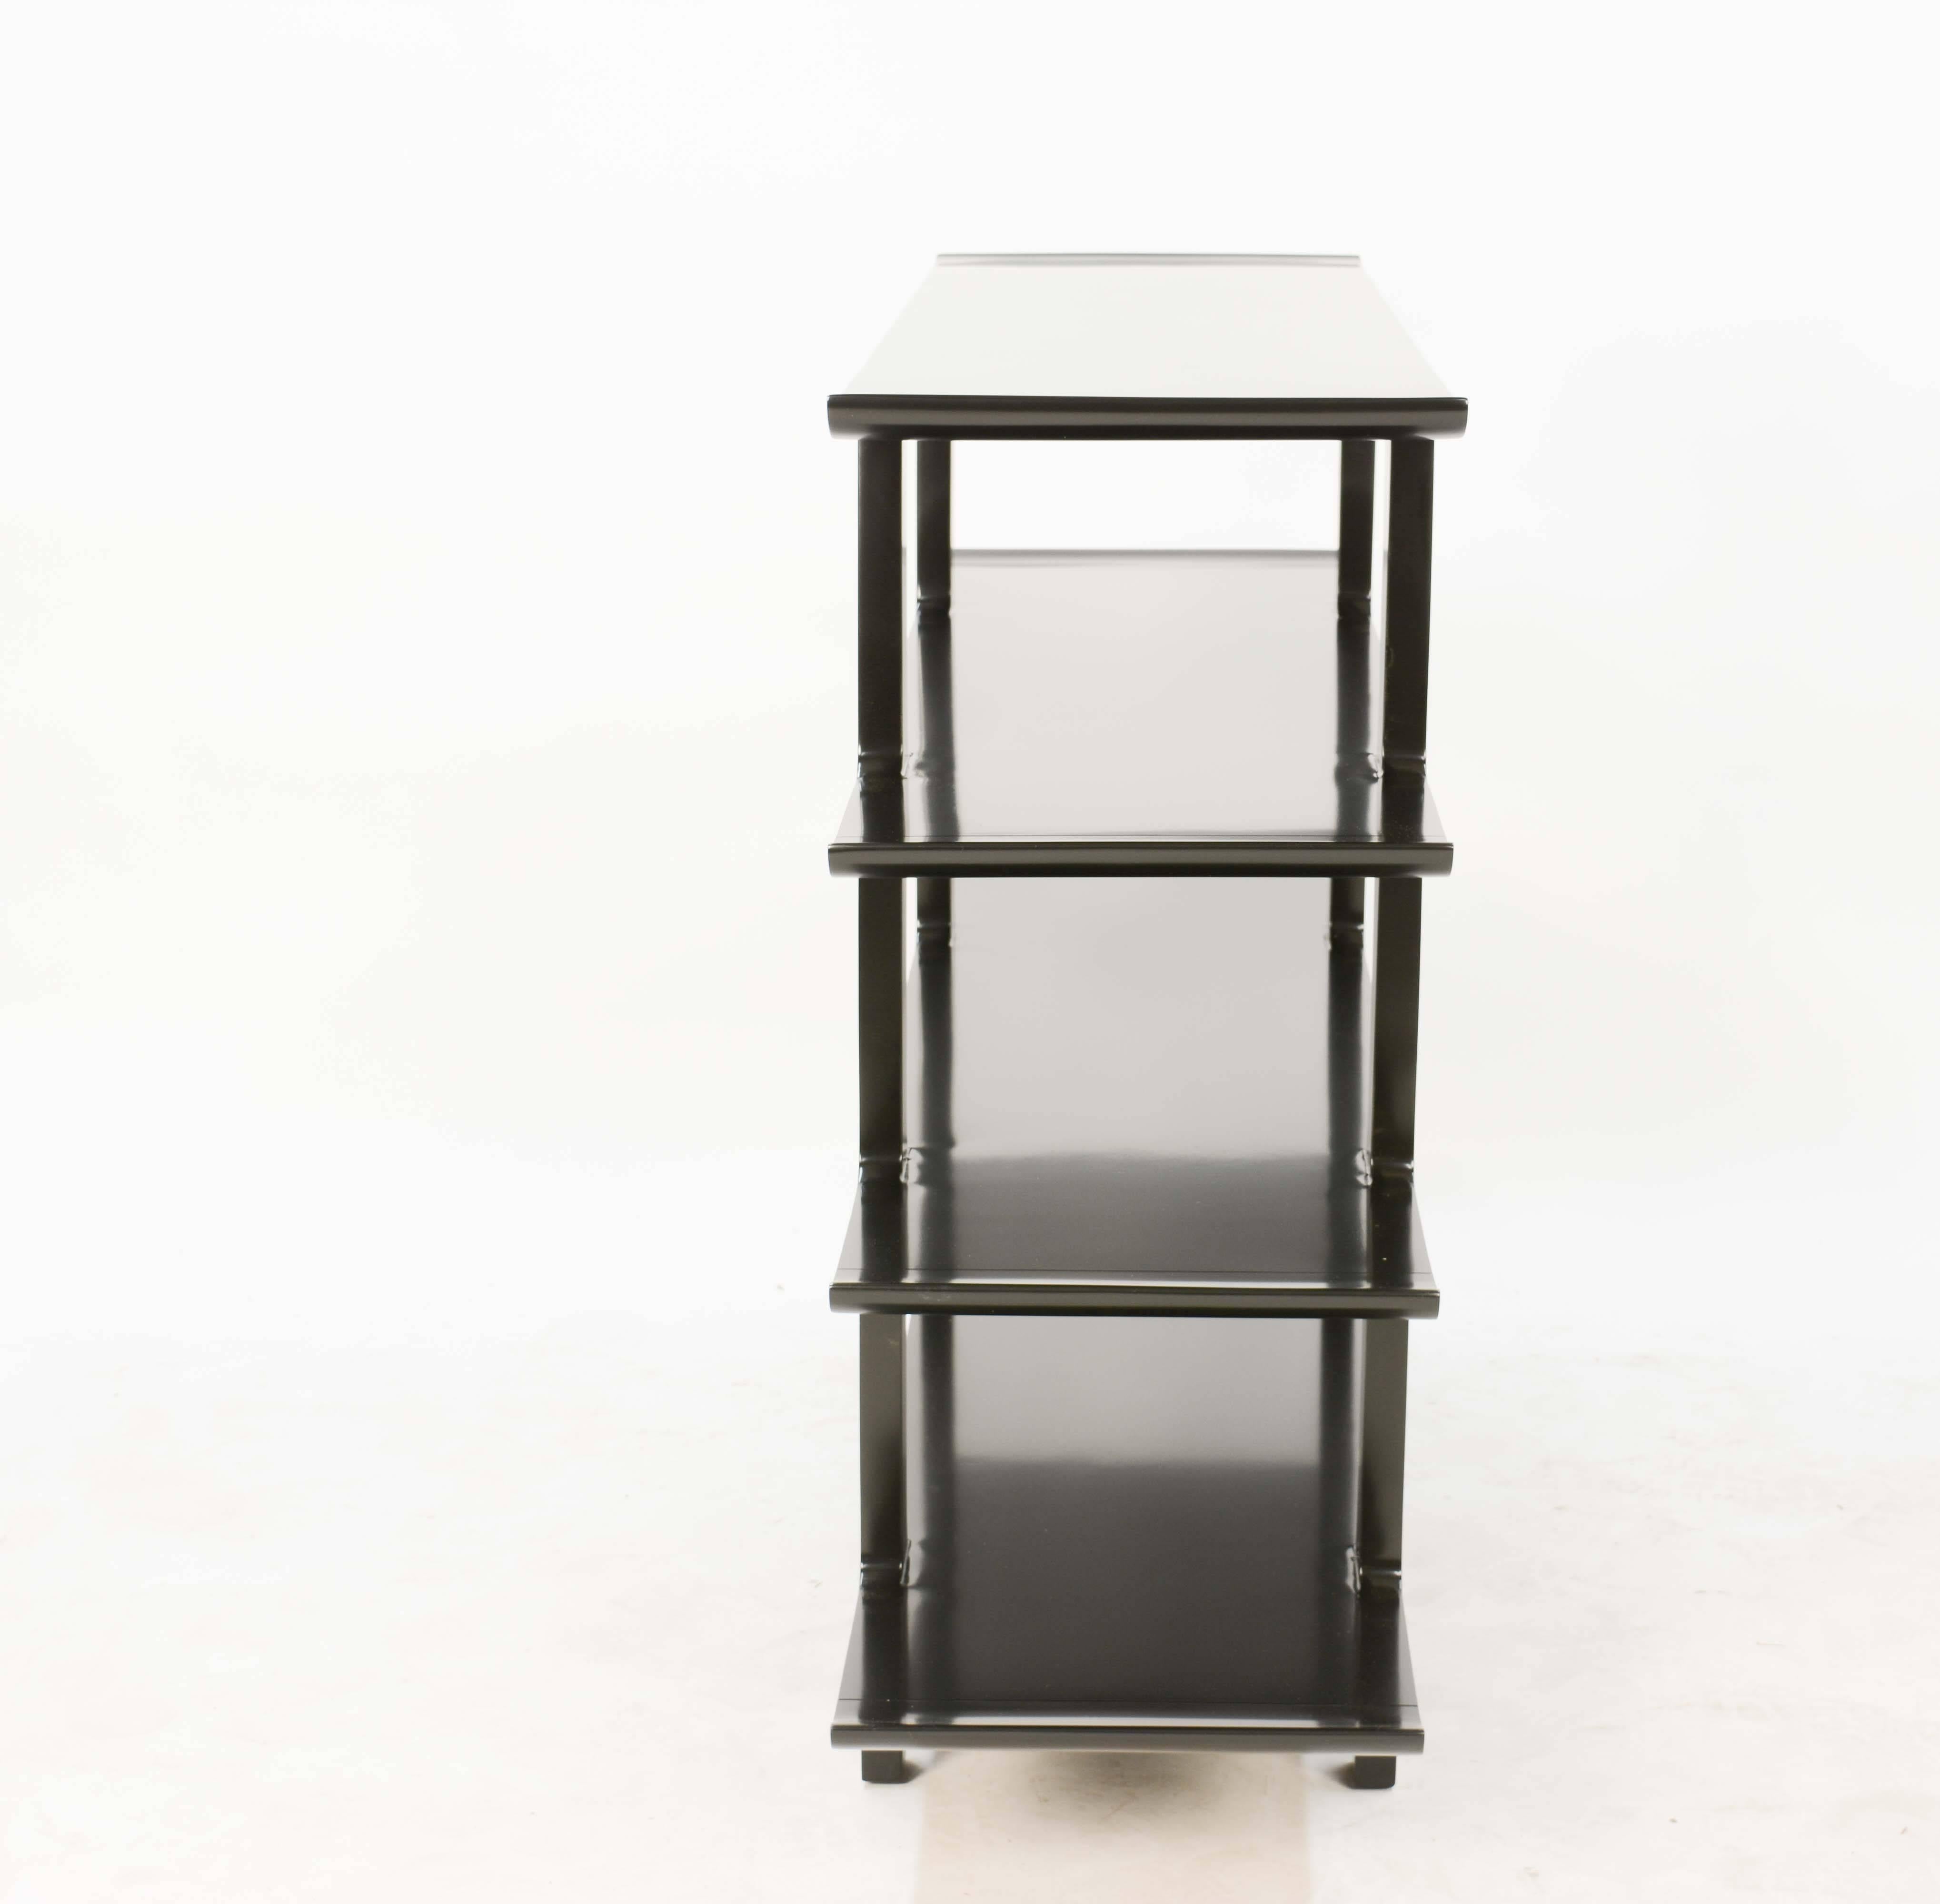 American Edward Wormley's Stunning Étagère Bookcase for Drexel in Ebonized Lacquer Finish